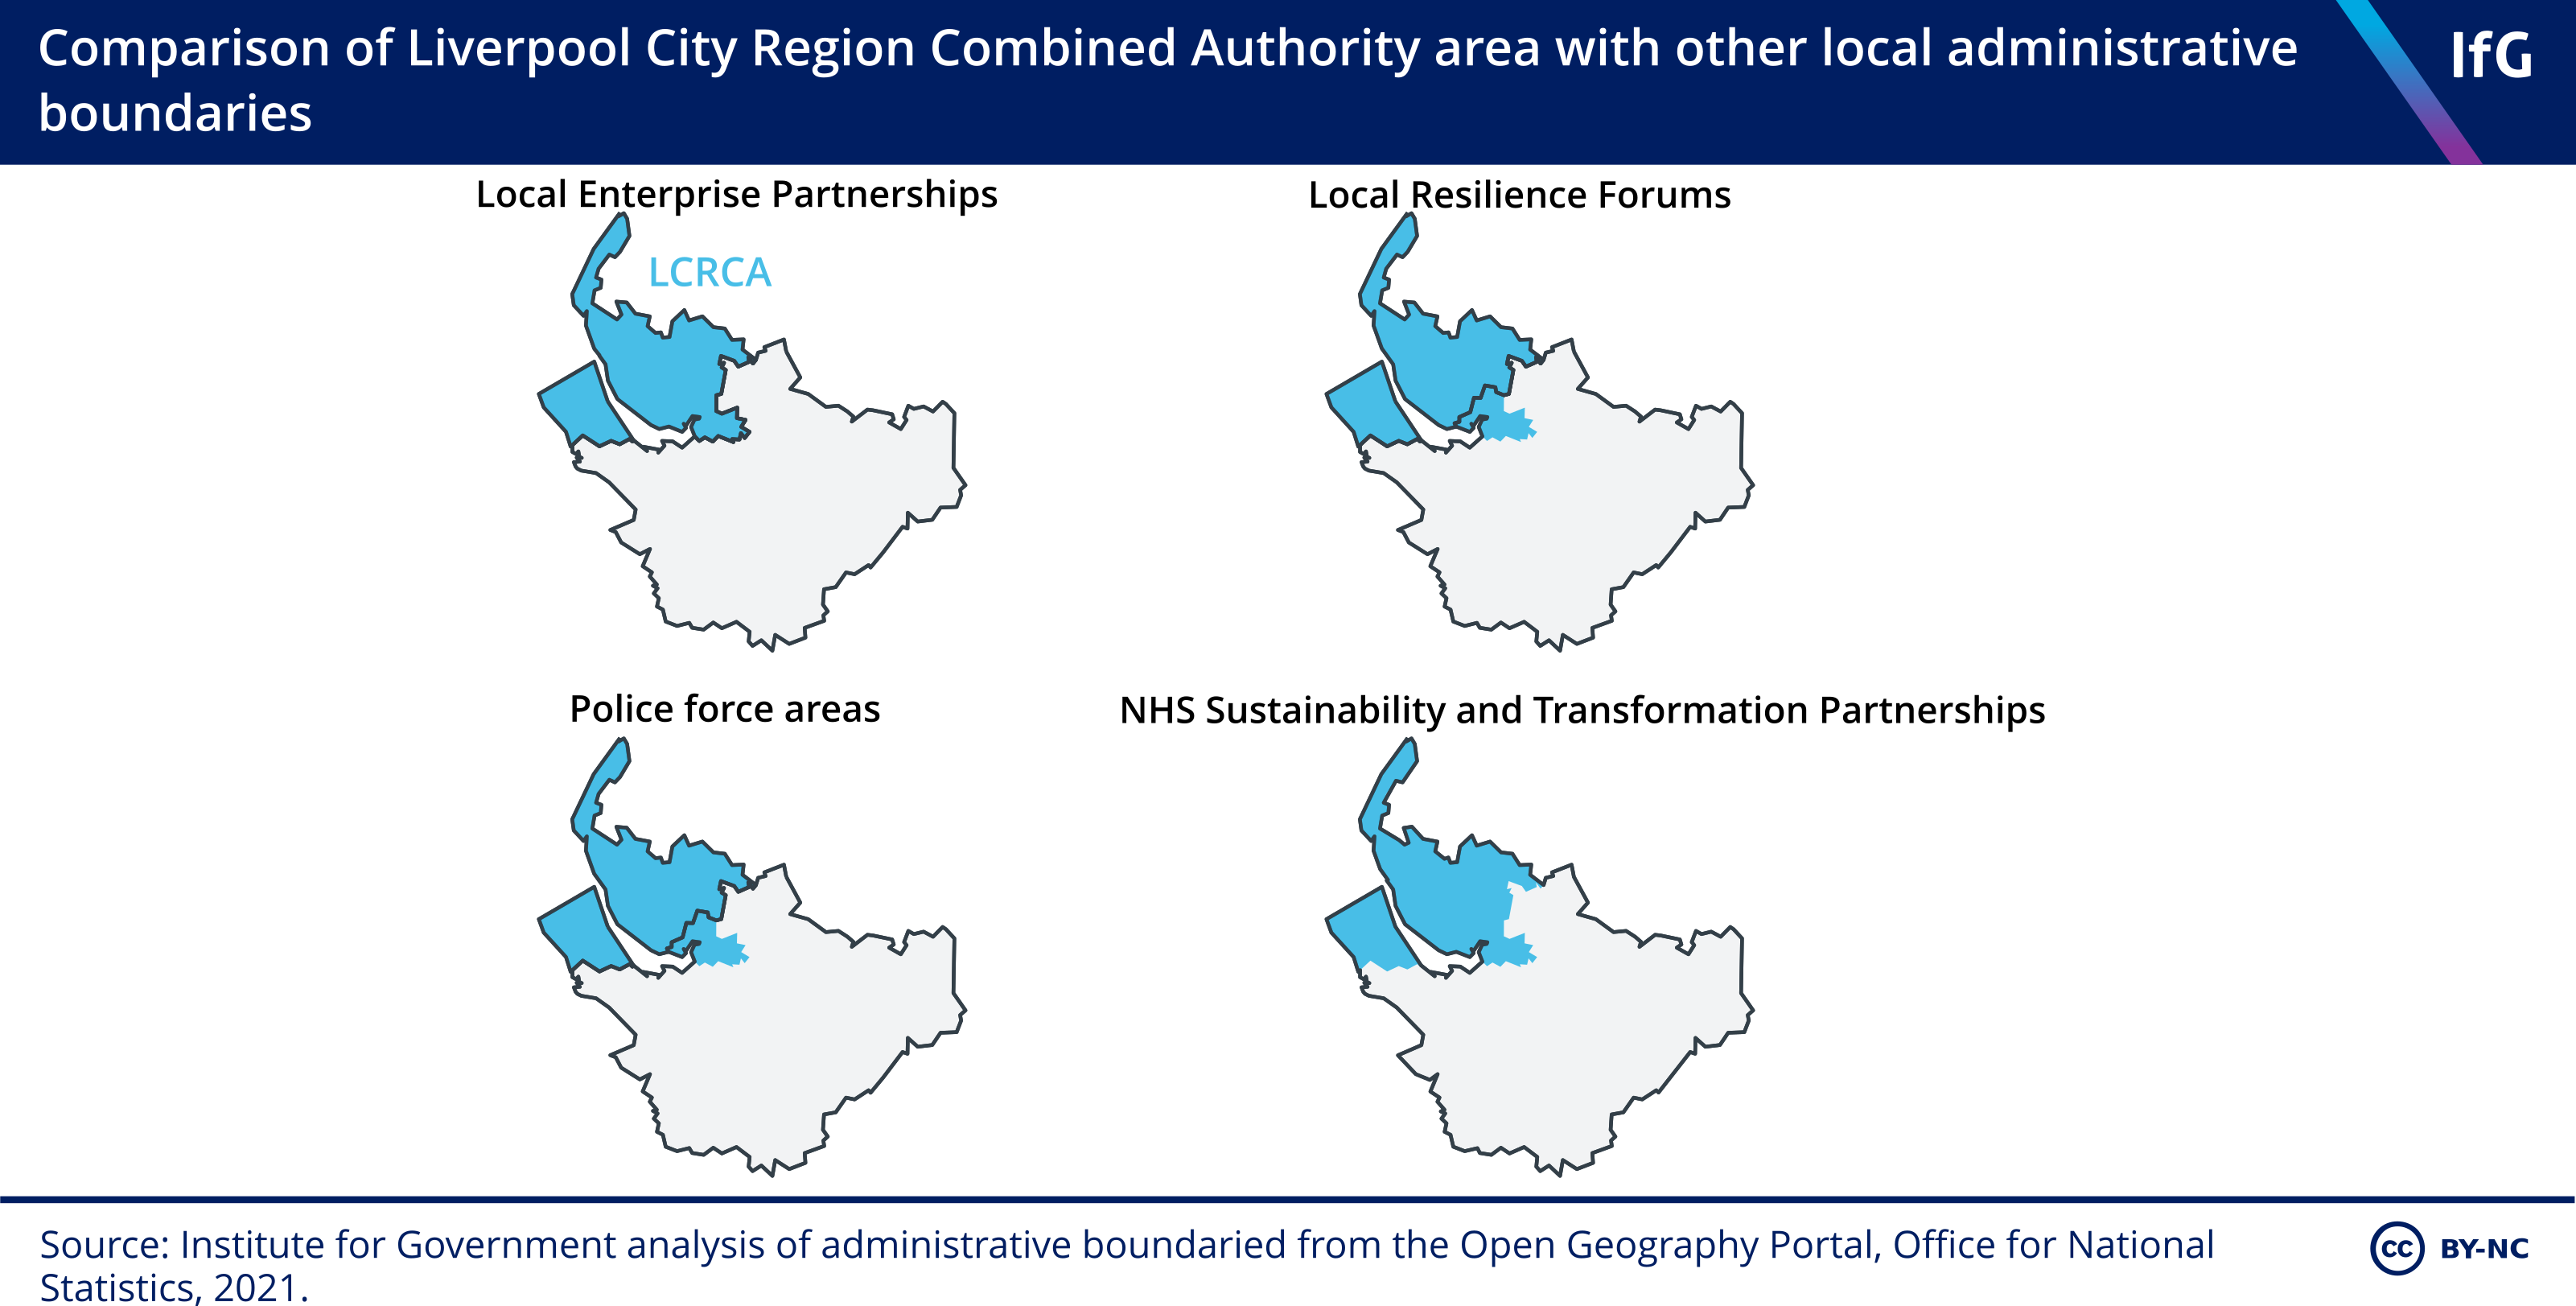 Comparison of Liverpool City Region Combined Authority area with other local administrative boundaries